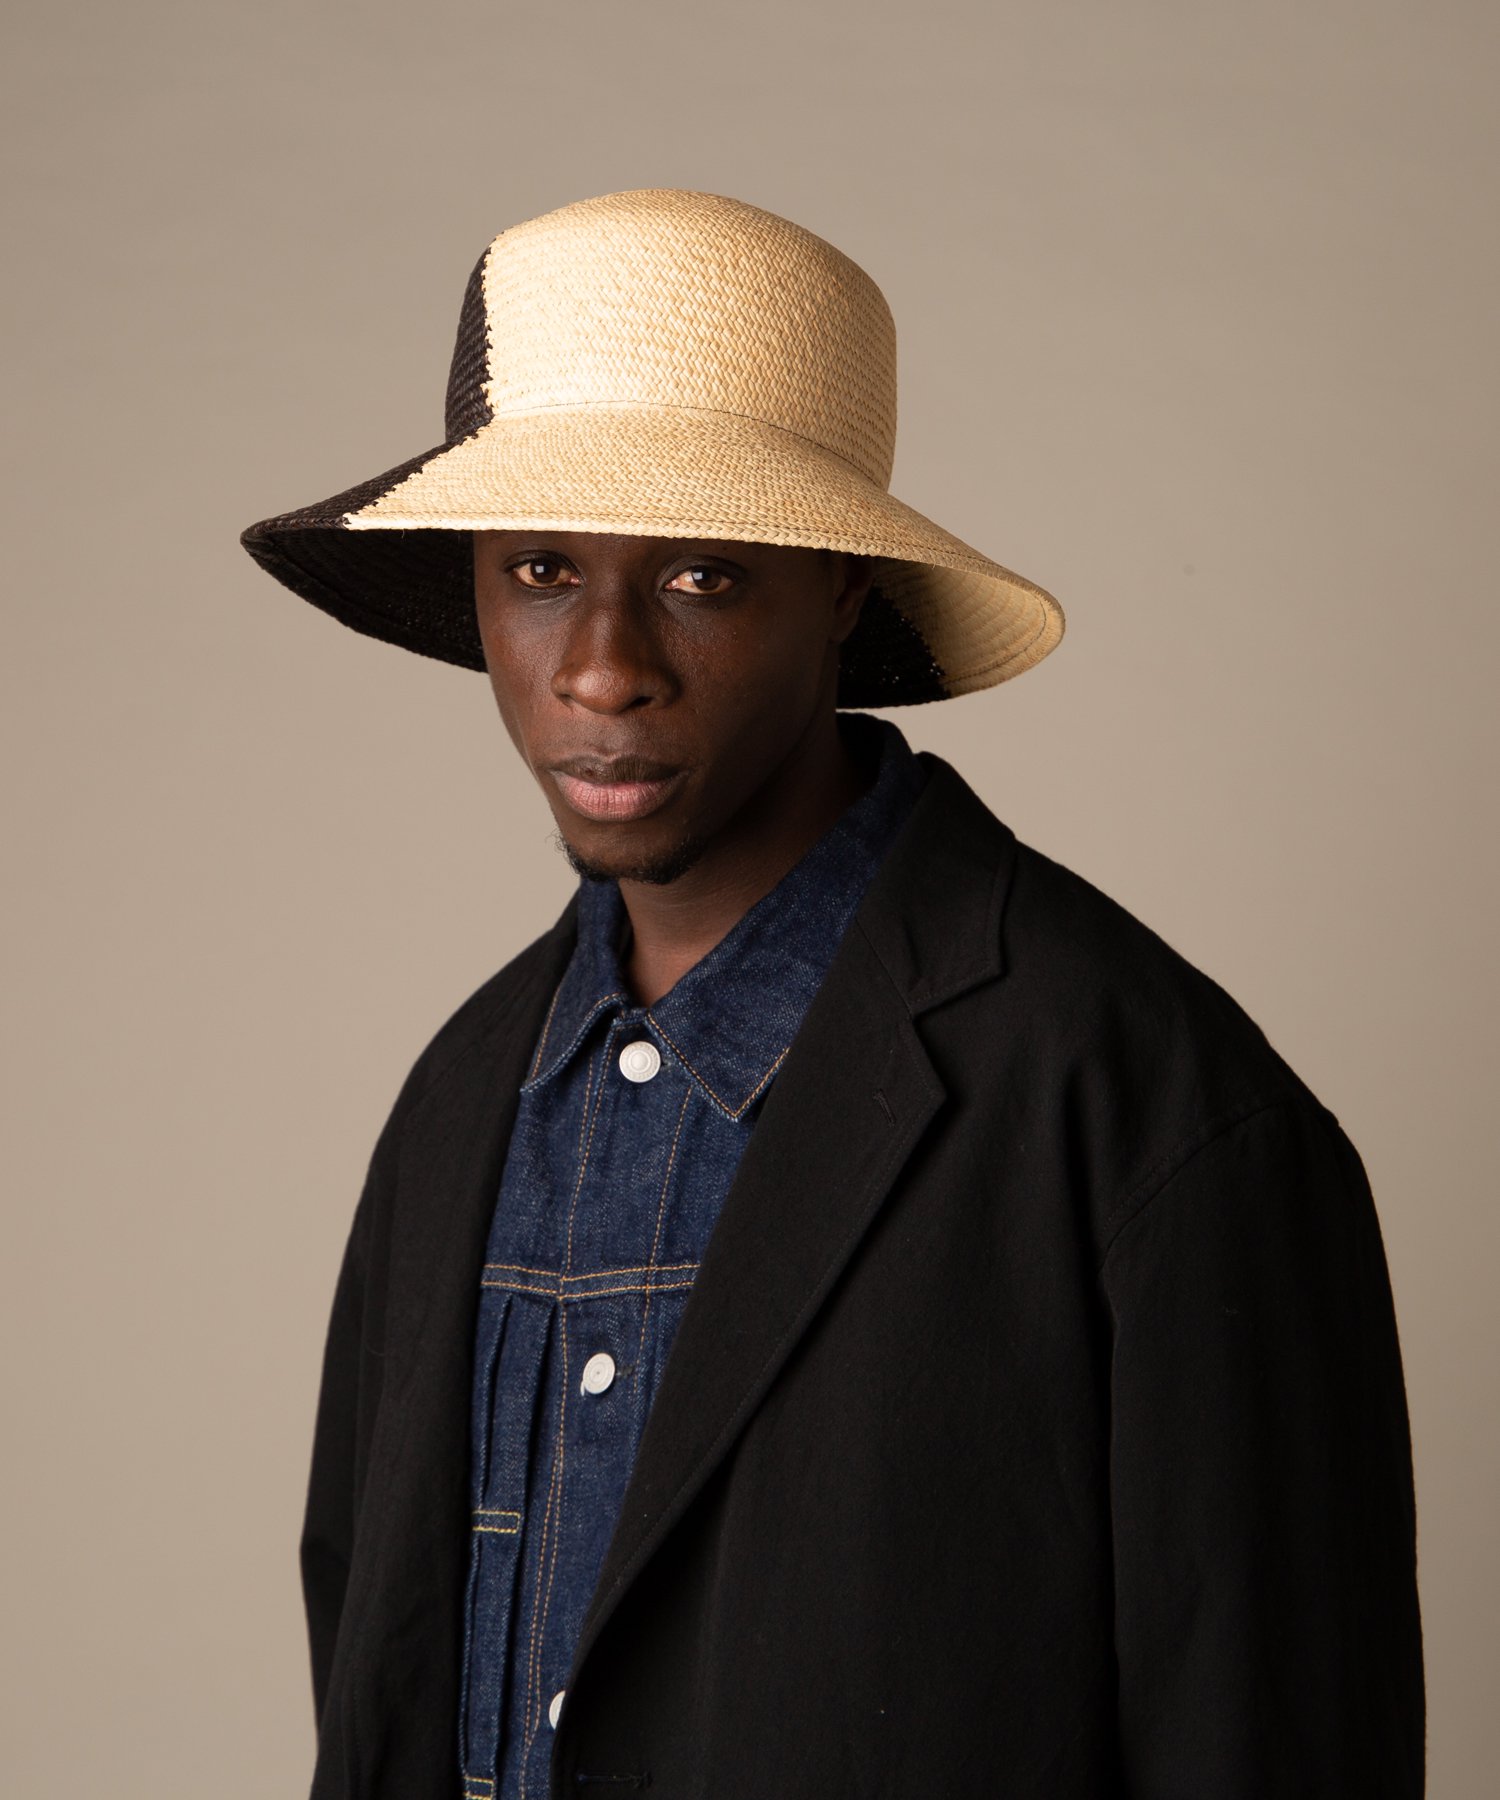 <img class='new_mark_img1' src='https://img.shop-pro.jp/img/new/icons20.gif' style='border:none;display:inline;margin:0px;padding:0px;width:auto;' />Indietro Association 059 Half Color Panama Hat